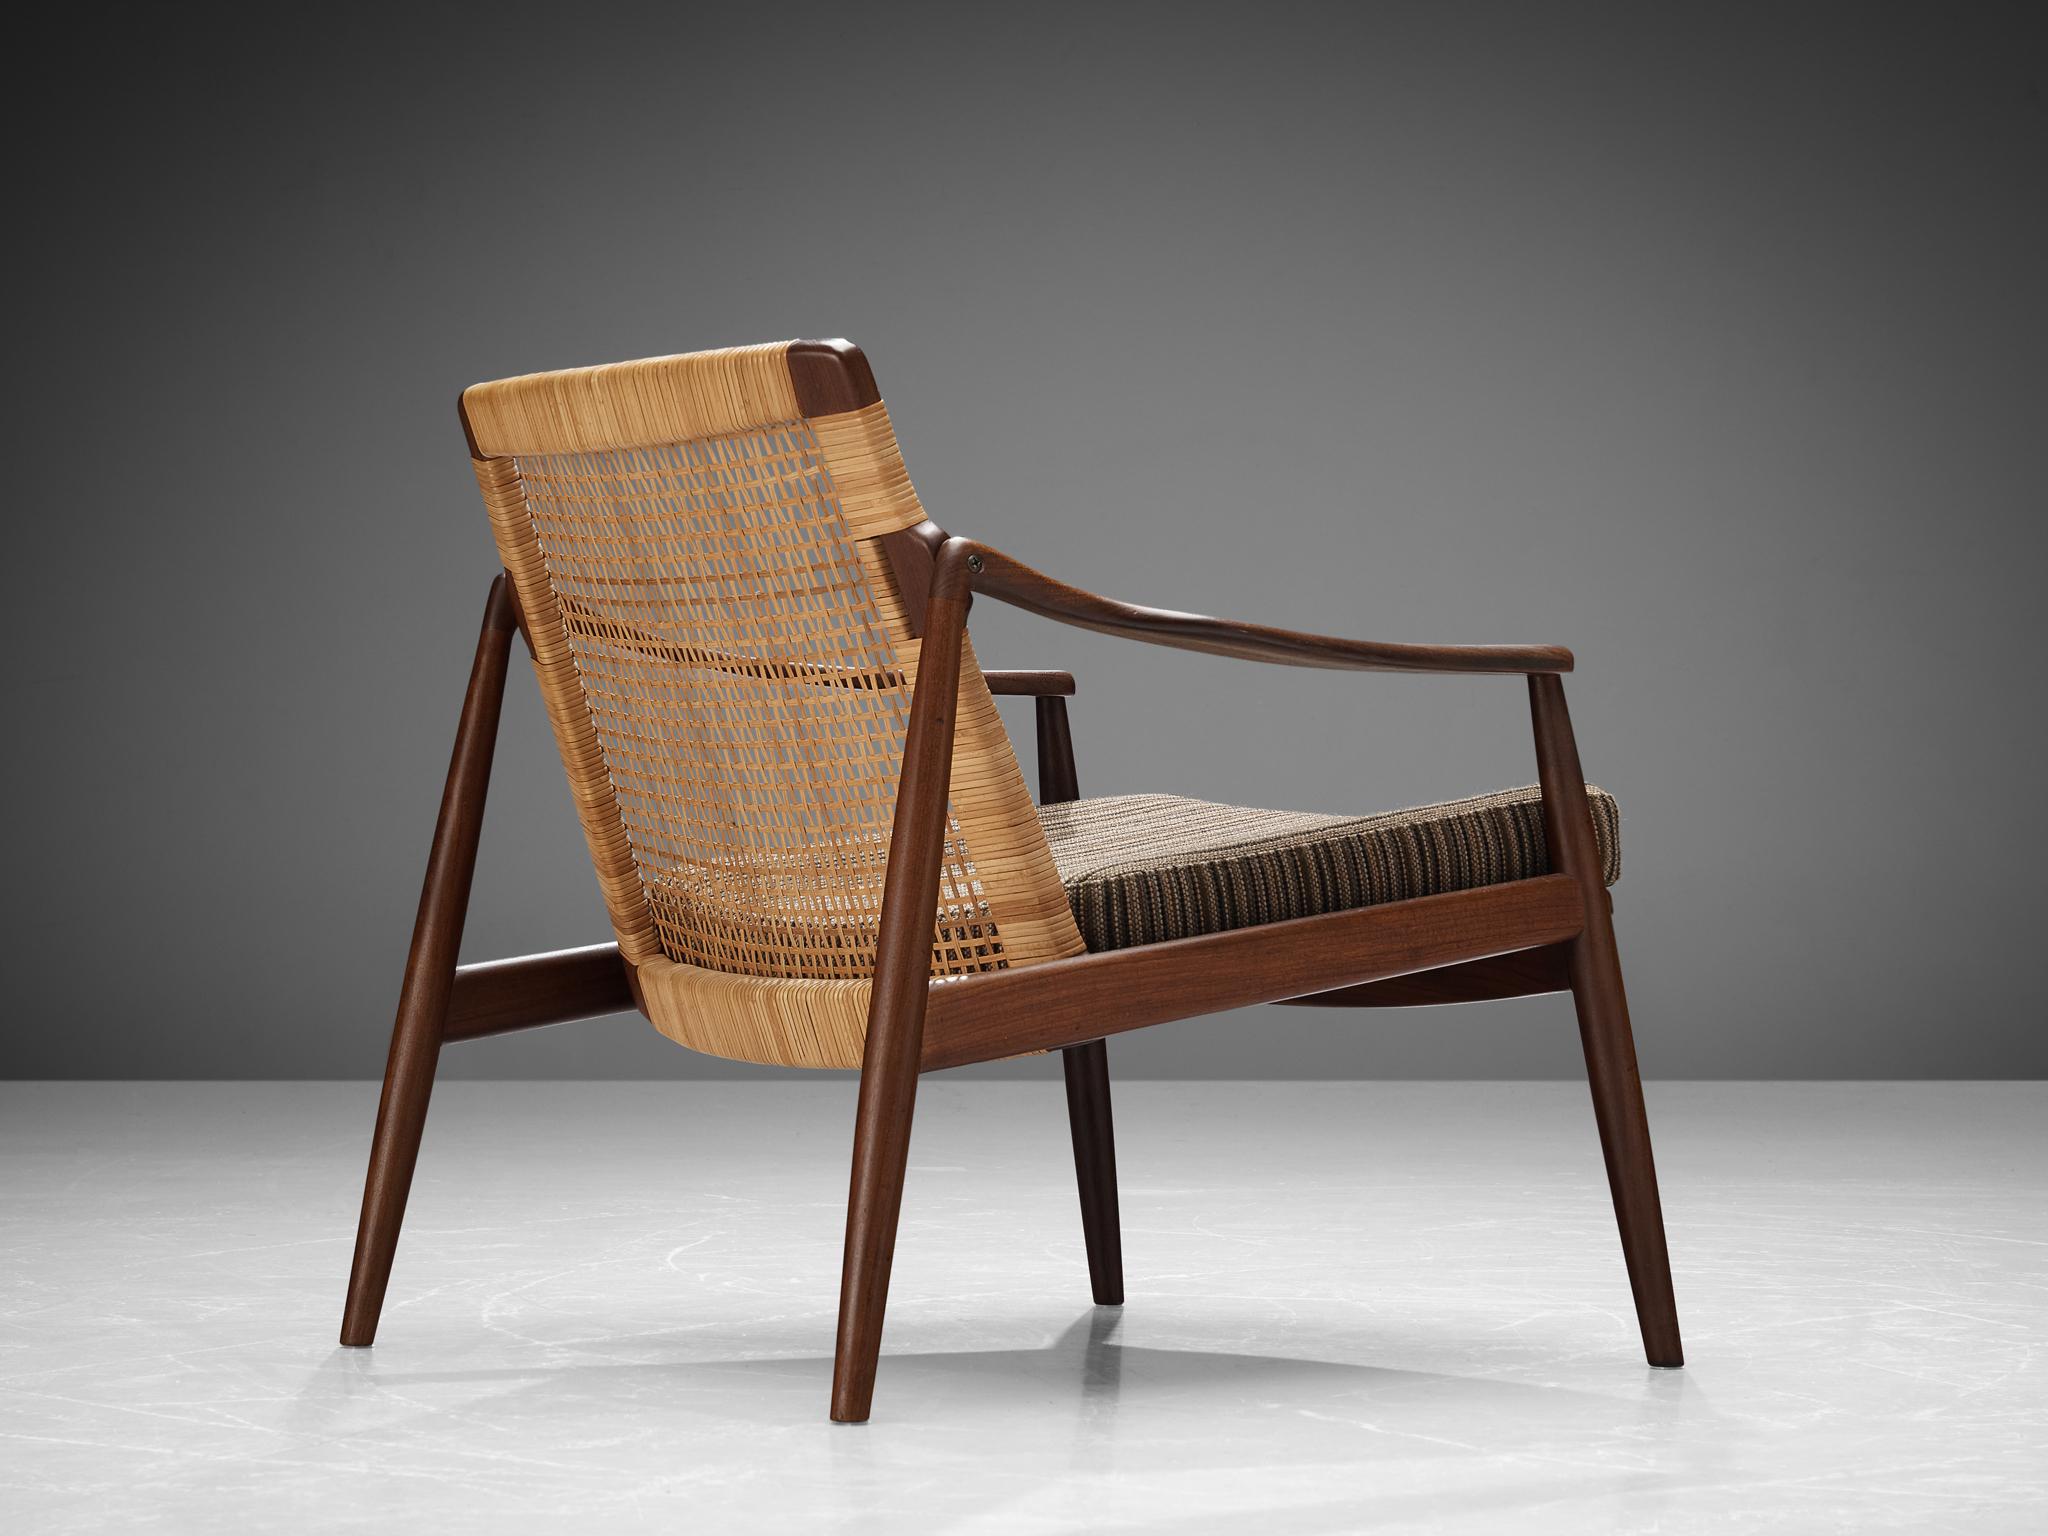 Hartmut Lohmeyer for Wilkhahn, lounge chair, teak, cane, fabric striped upholstery, Germany, 1960

The lounge chair by Hartmut Lohmeyer is organically shaped. The wide open teak frame features a slightly tilted back made out of cane. The softly